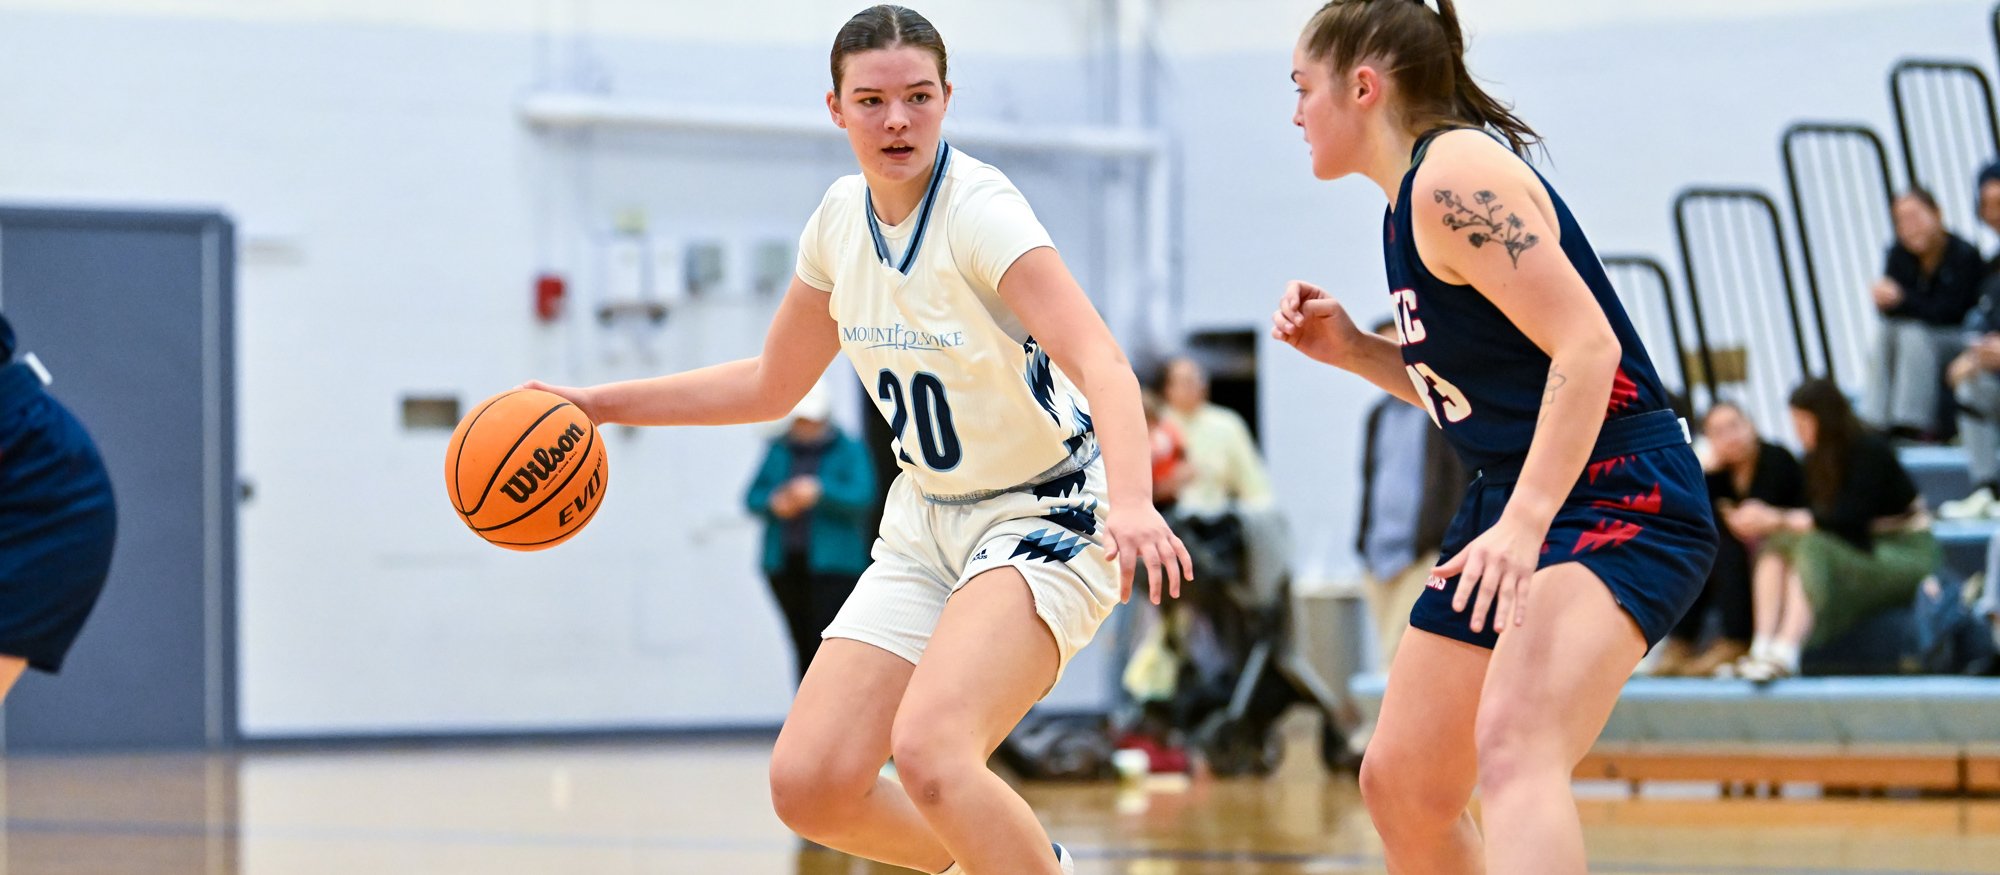 Emma Goff had her first career double-double with 12 points and 14 rebounds at Elms College on Nov. 28, 2023. (RJB Sports file photo)